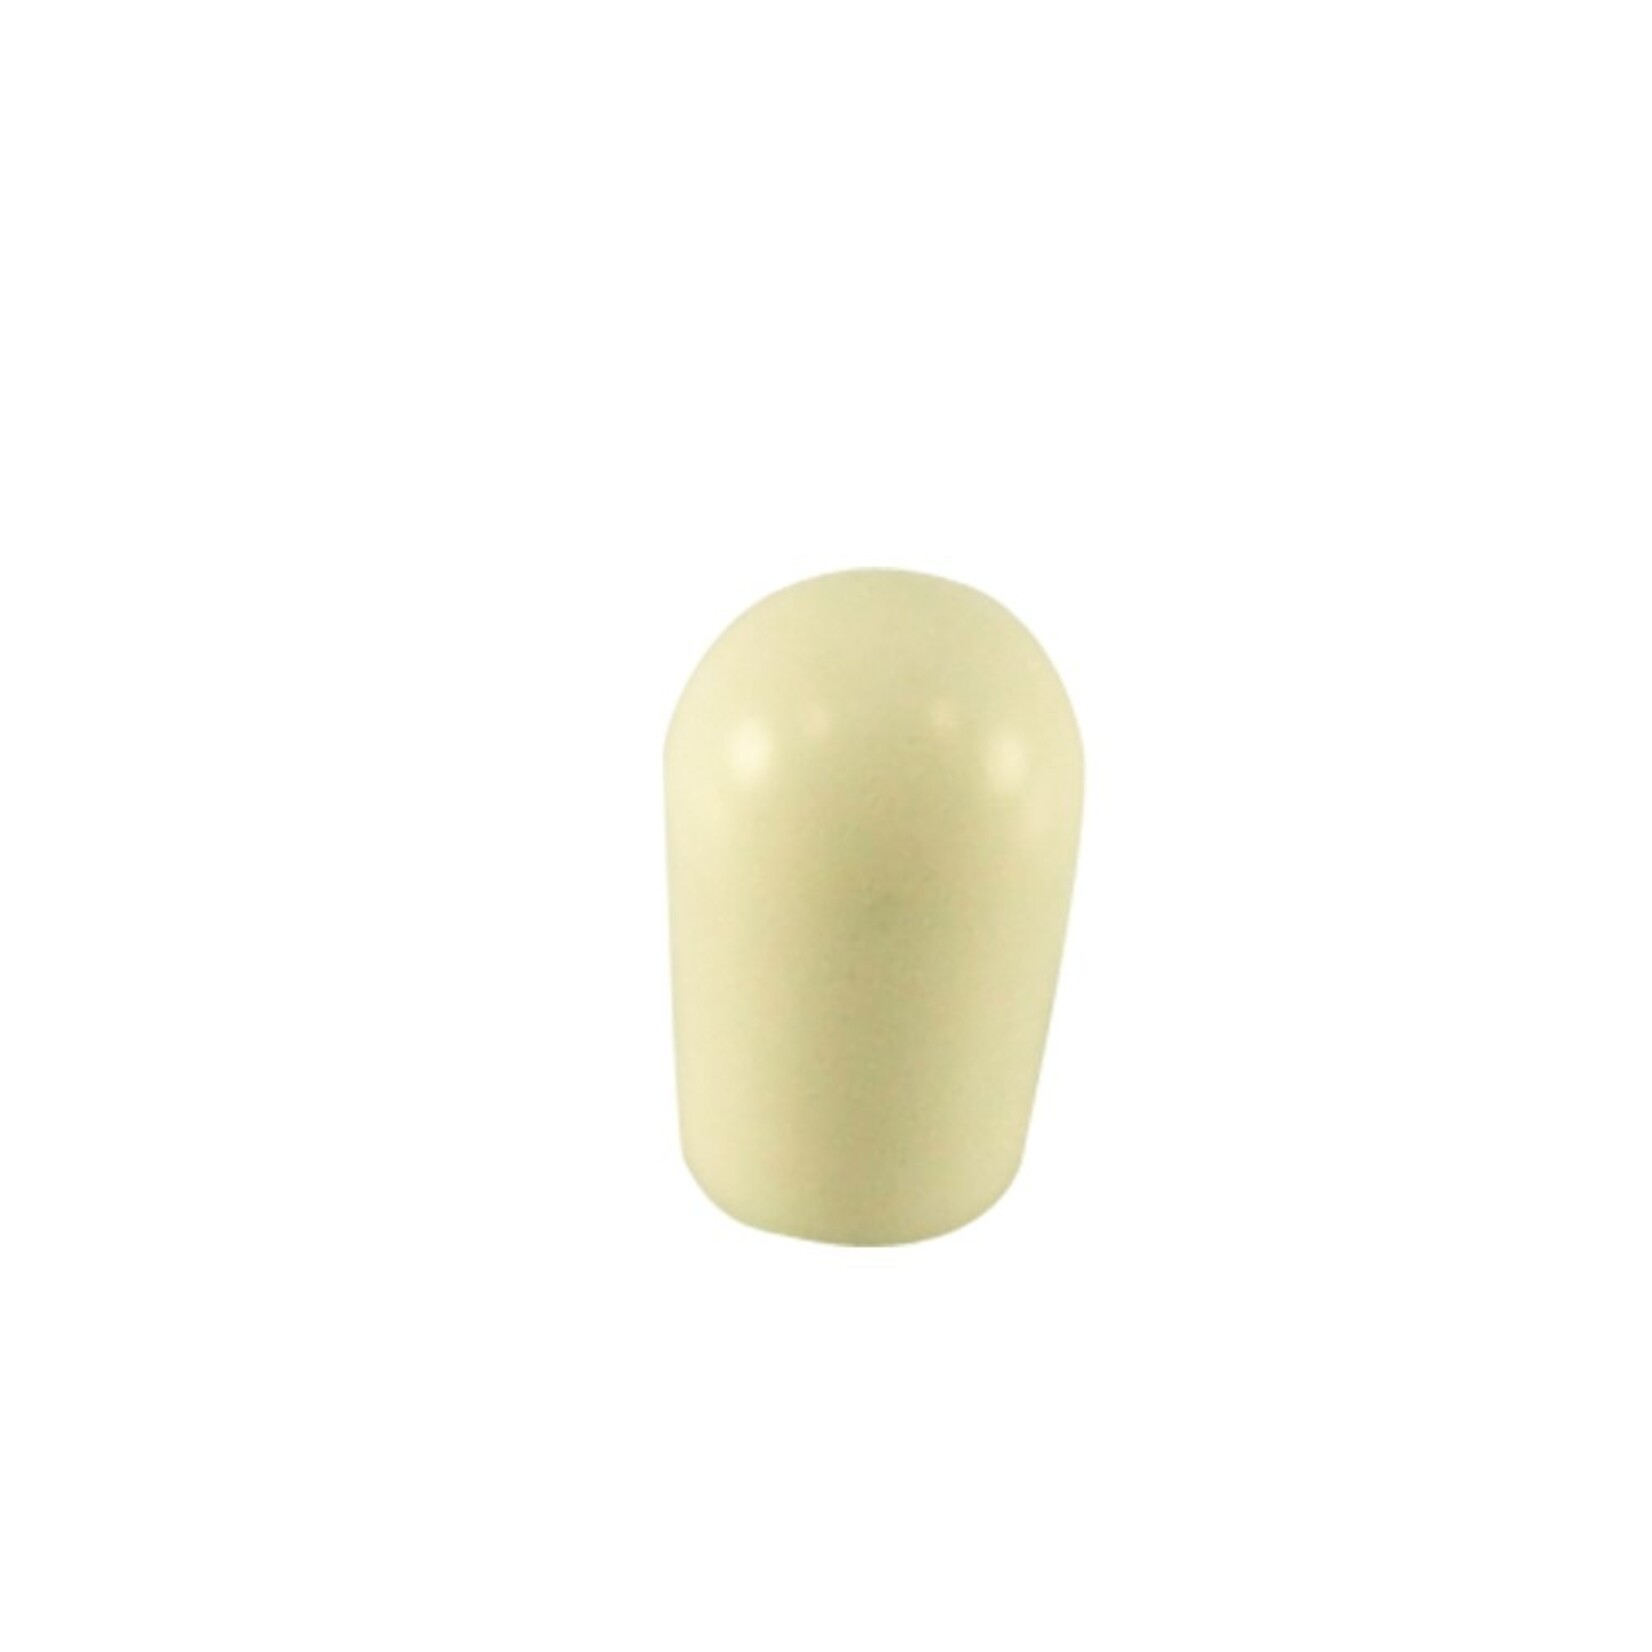 WD Music Toggle Switch Tip - White